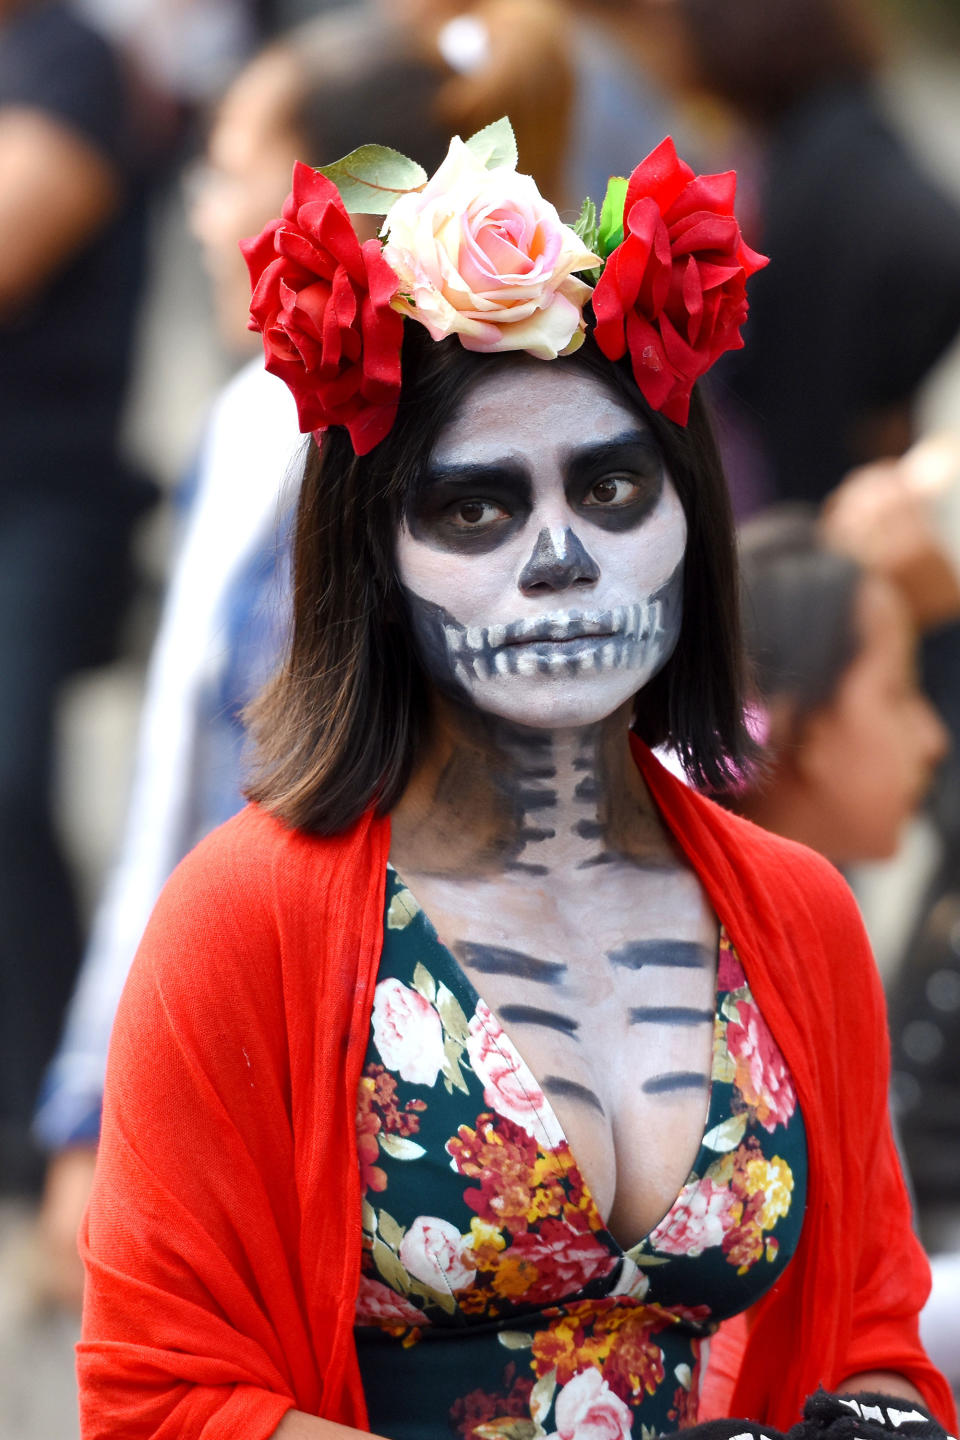 <p>Participants are seen during the traditional Day of the Dead parade at Reforma Avenue in Mexico City, Mexico on Oct. 28, 2017. (Photo: Carlos Tischler/REX/Shutterstock) </p>